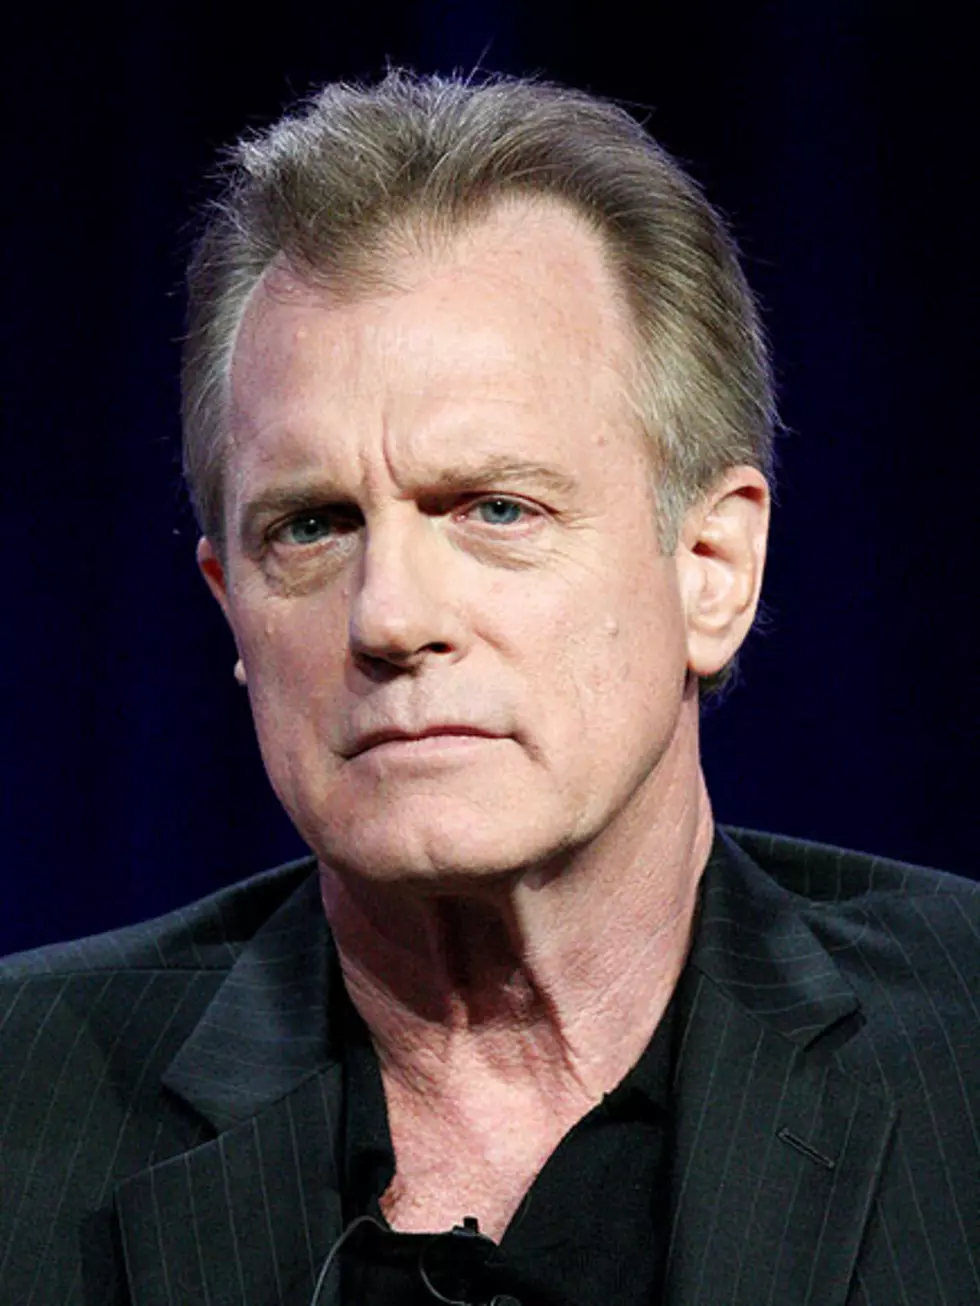 Actor Stephen Collins Publicly Confesses to Sexual Abuse of Underage Girls [PHOTO]